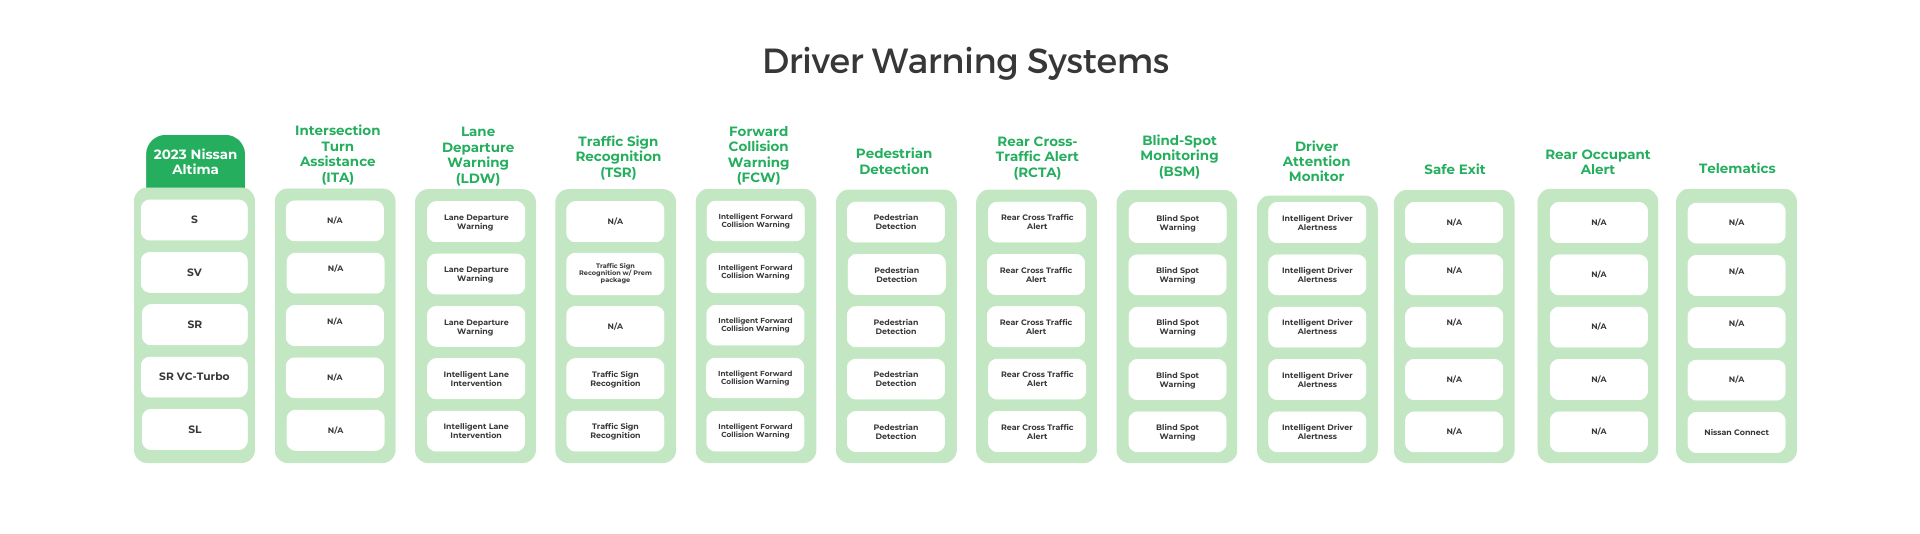 2023 Nissan Altima Driver Warning Systems